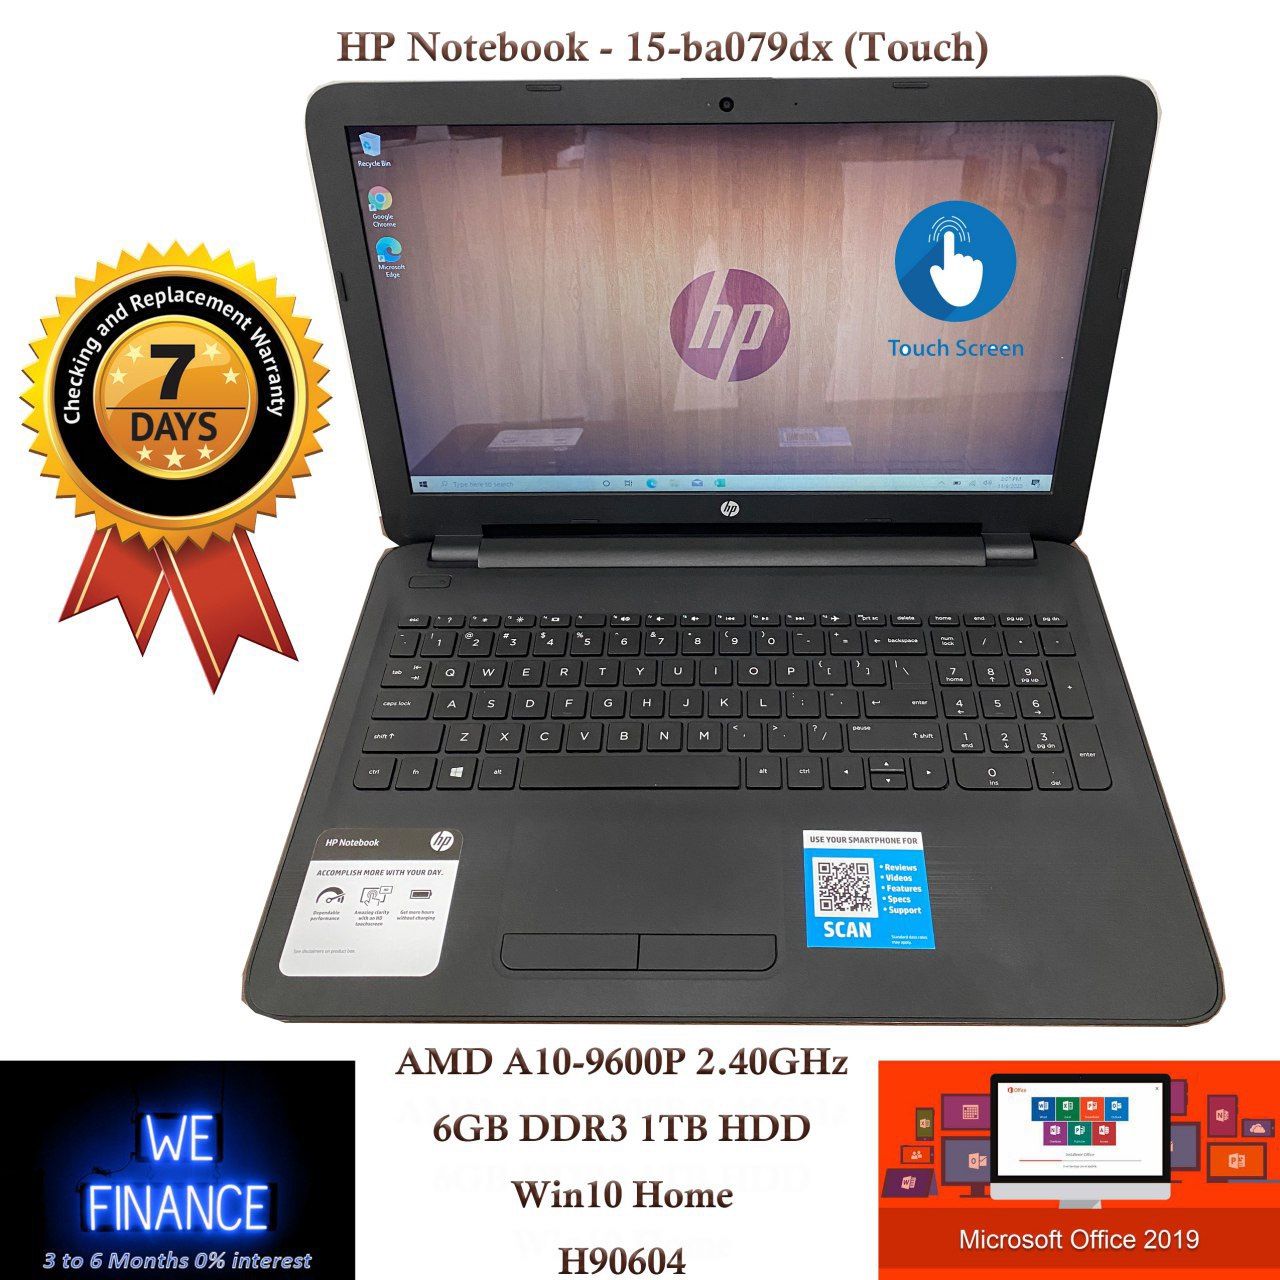 HP Notebook - 15-ba079dx (Touch) AMD A10, 6GB DDR3, 1TB HDD, Win10 "H90604"